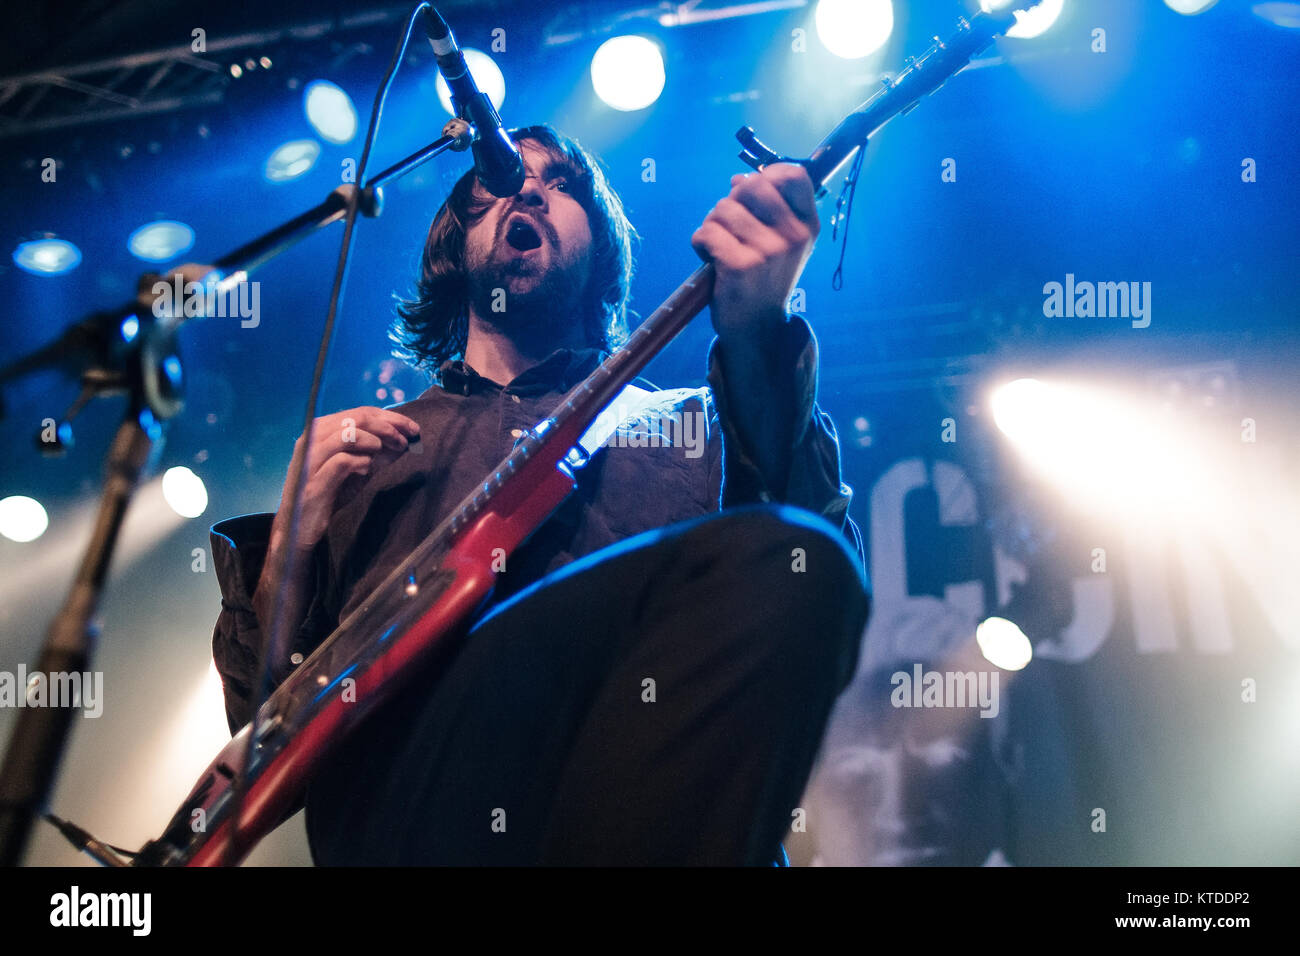 The English indie rock band The Vaccines performs a live concert at Pumpehuset in Copenhagen. Here singer and musician Justin Hayward-Young is seen live on stage. Denmark, 24/10 2012. Stock Photo